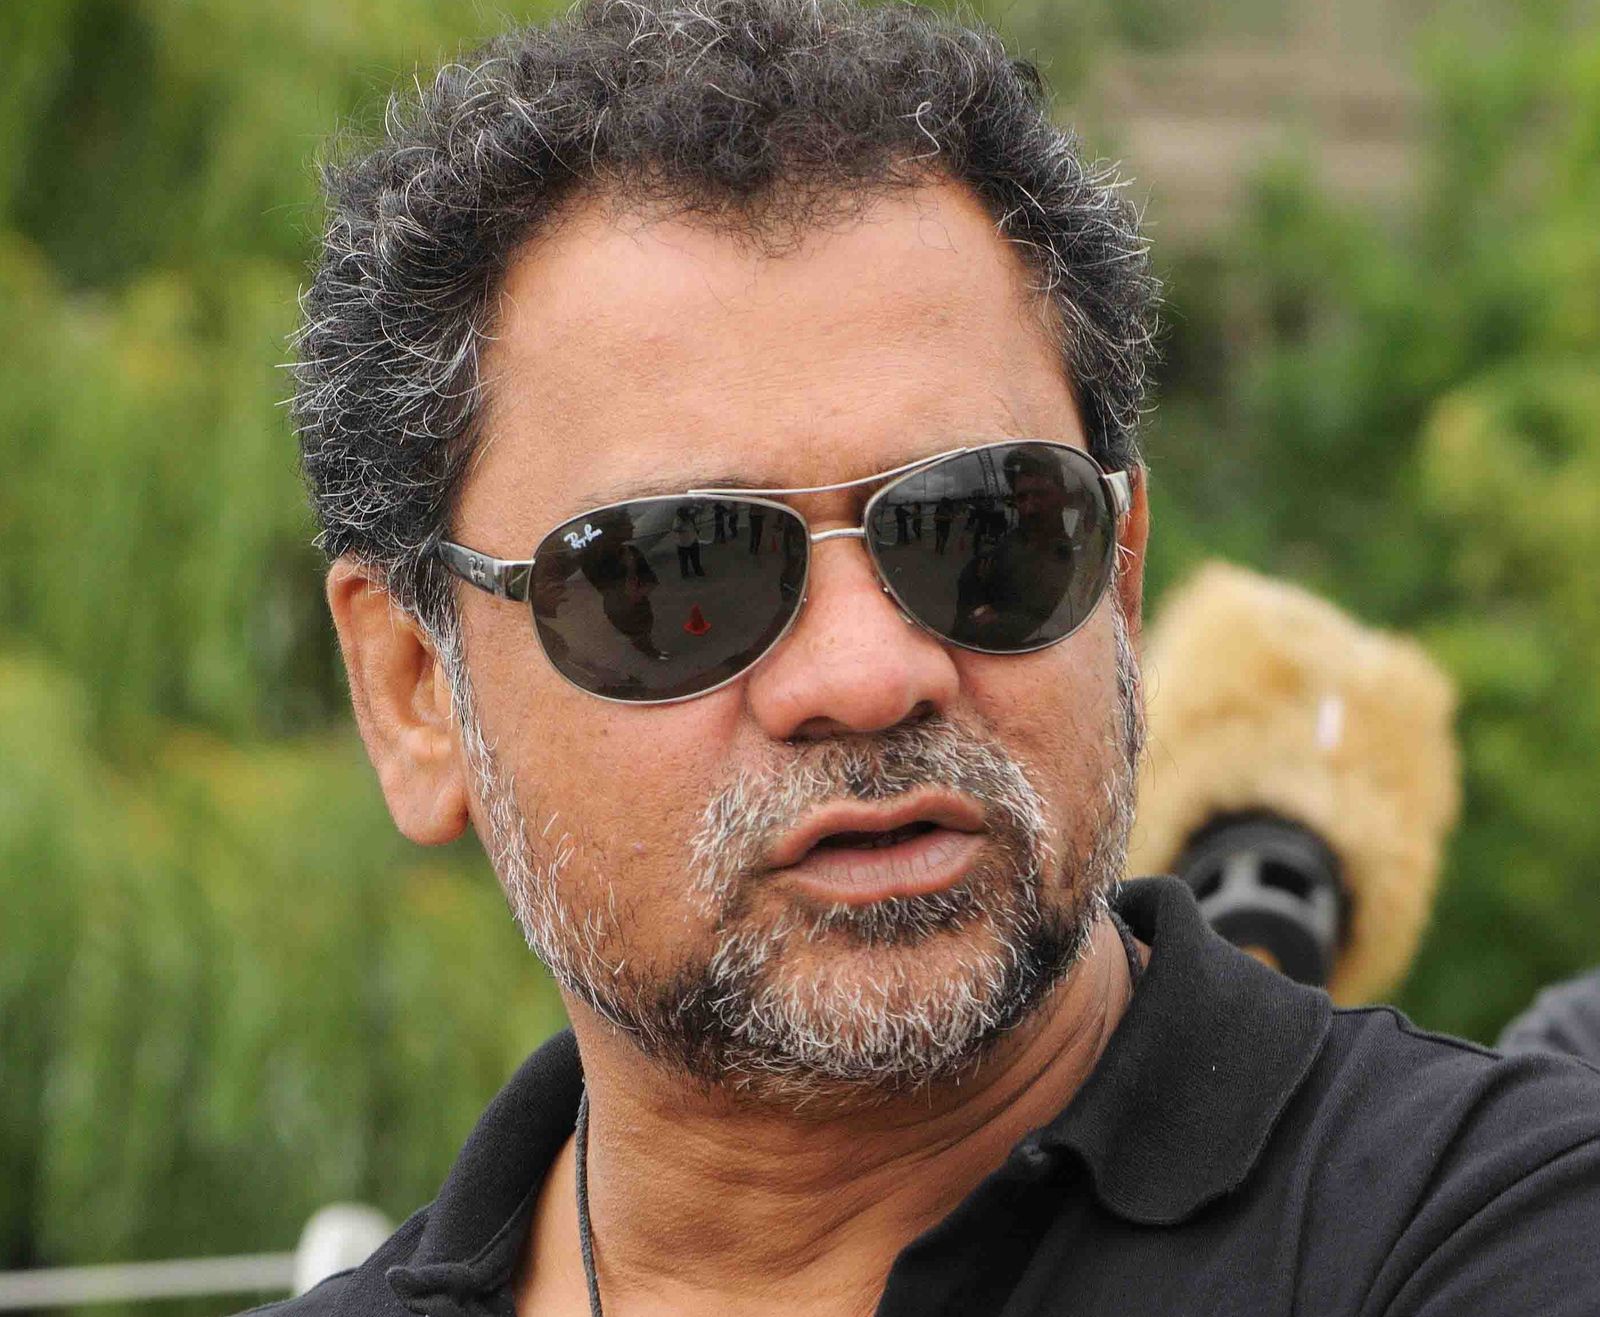 Anees Bazmee Signed For Another By Producers Of ‘Mubarakan’